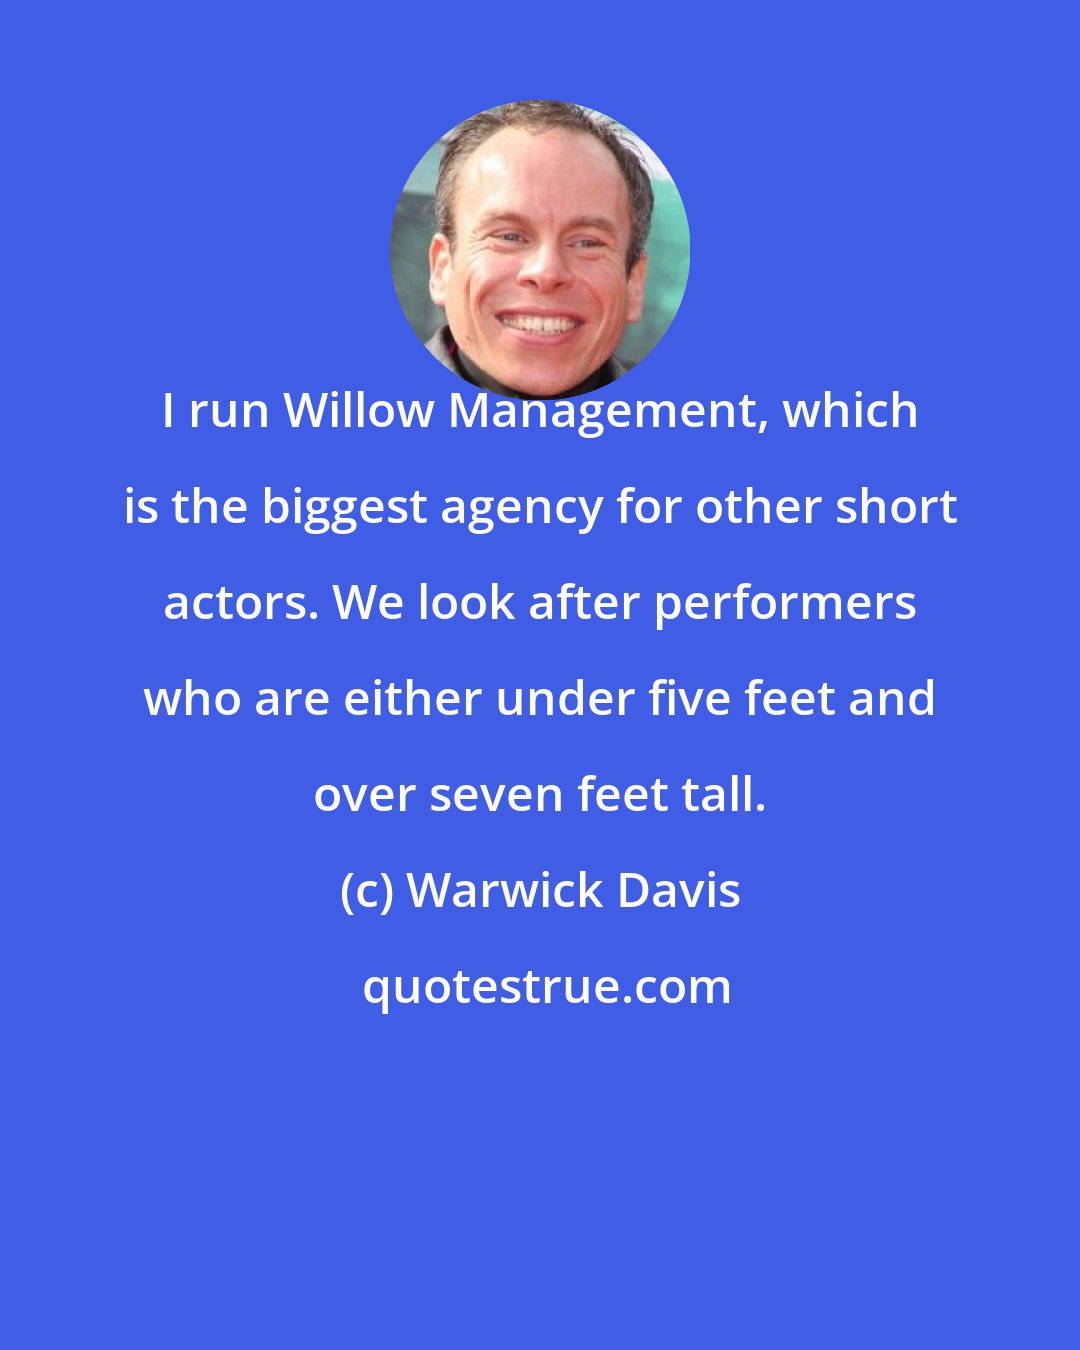 Warwick Davis: I run Willow Management, which is the biggest agency for other short actors. We look after performers who are either under five feet and over seven feet tall.